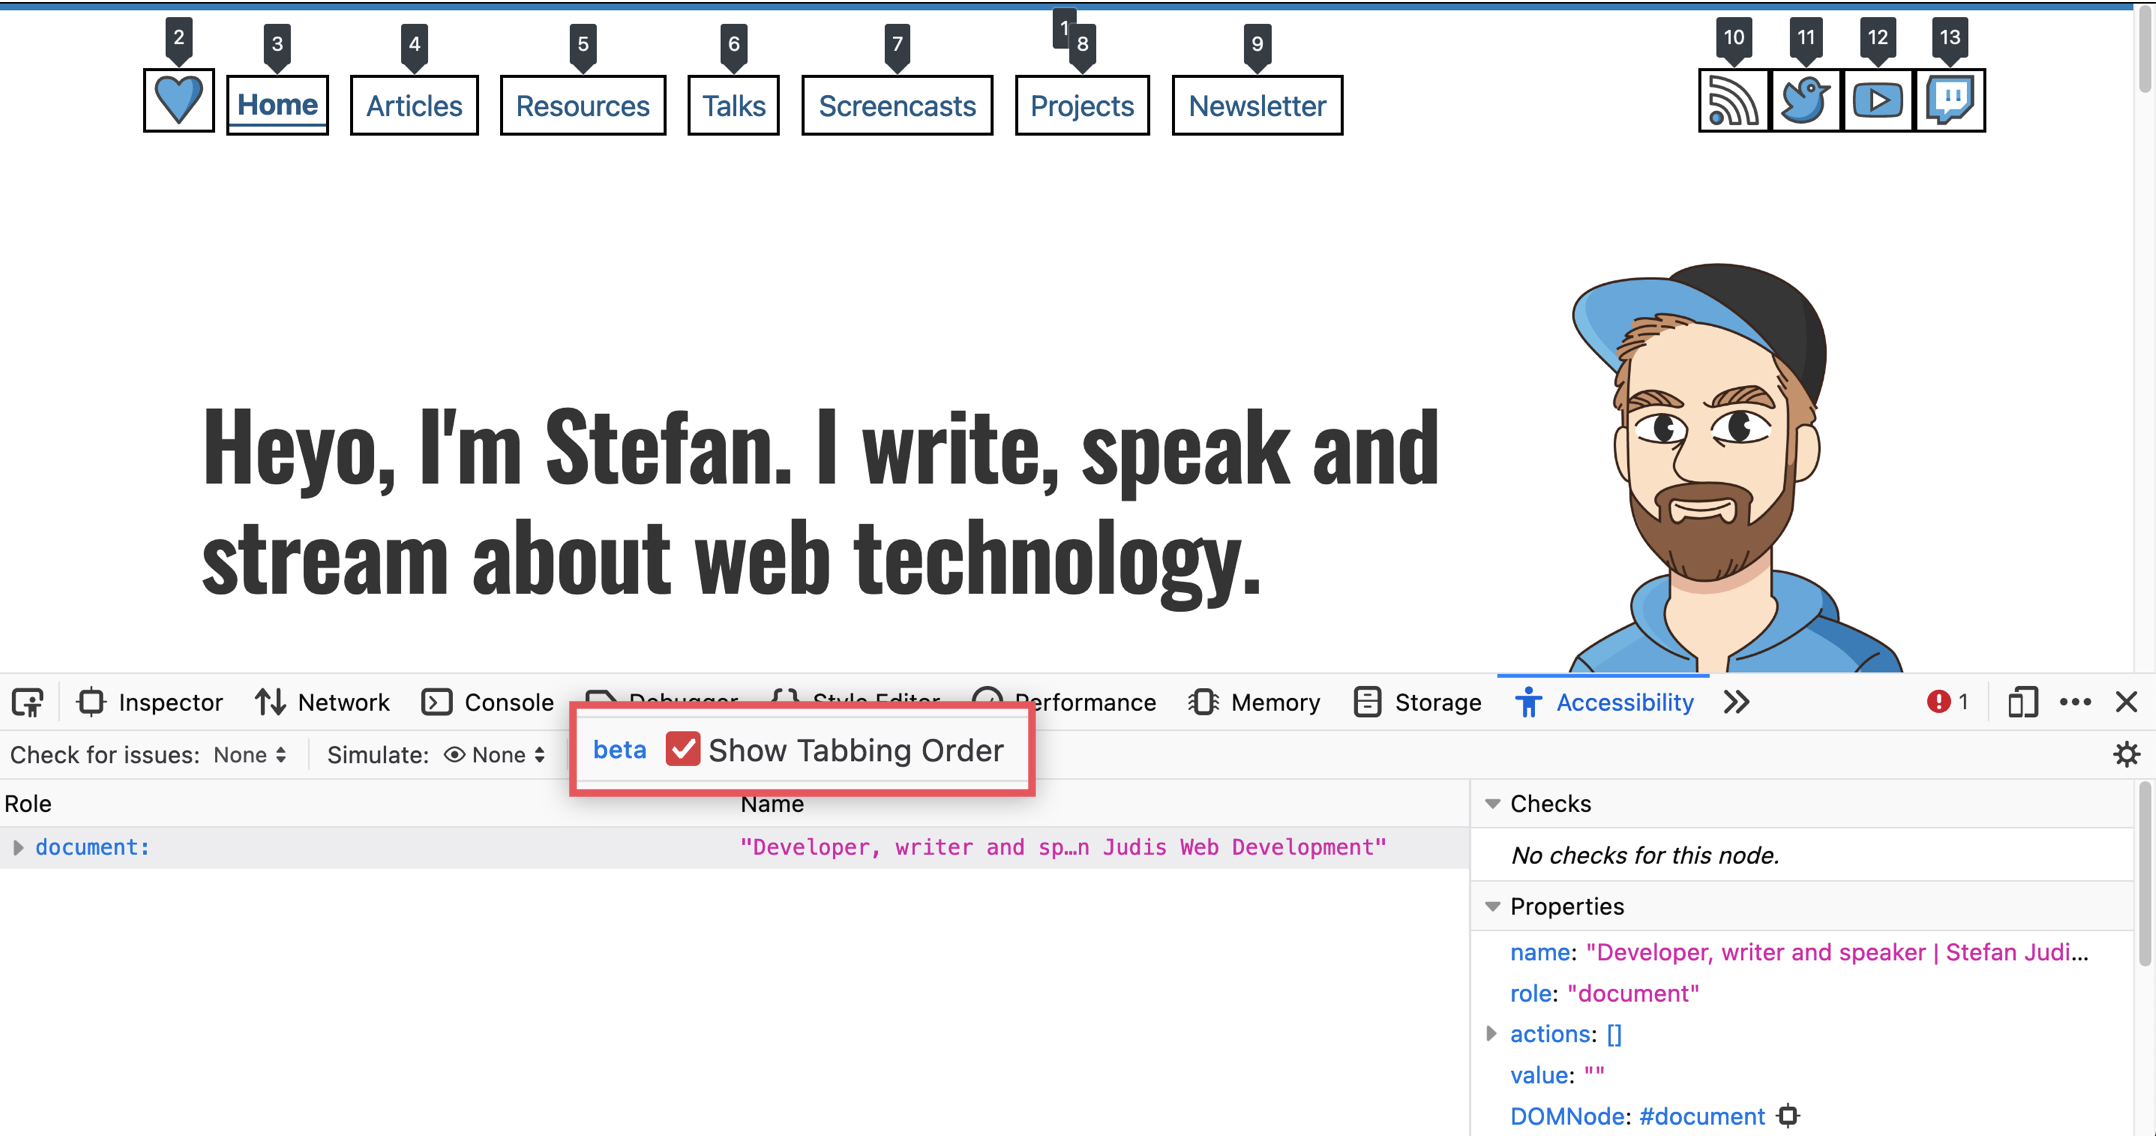 Firefox DevTools with an Open Accessibility panel that includes the "Show Tabbing Order" checkbox